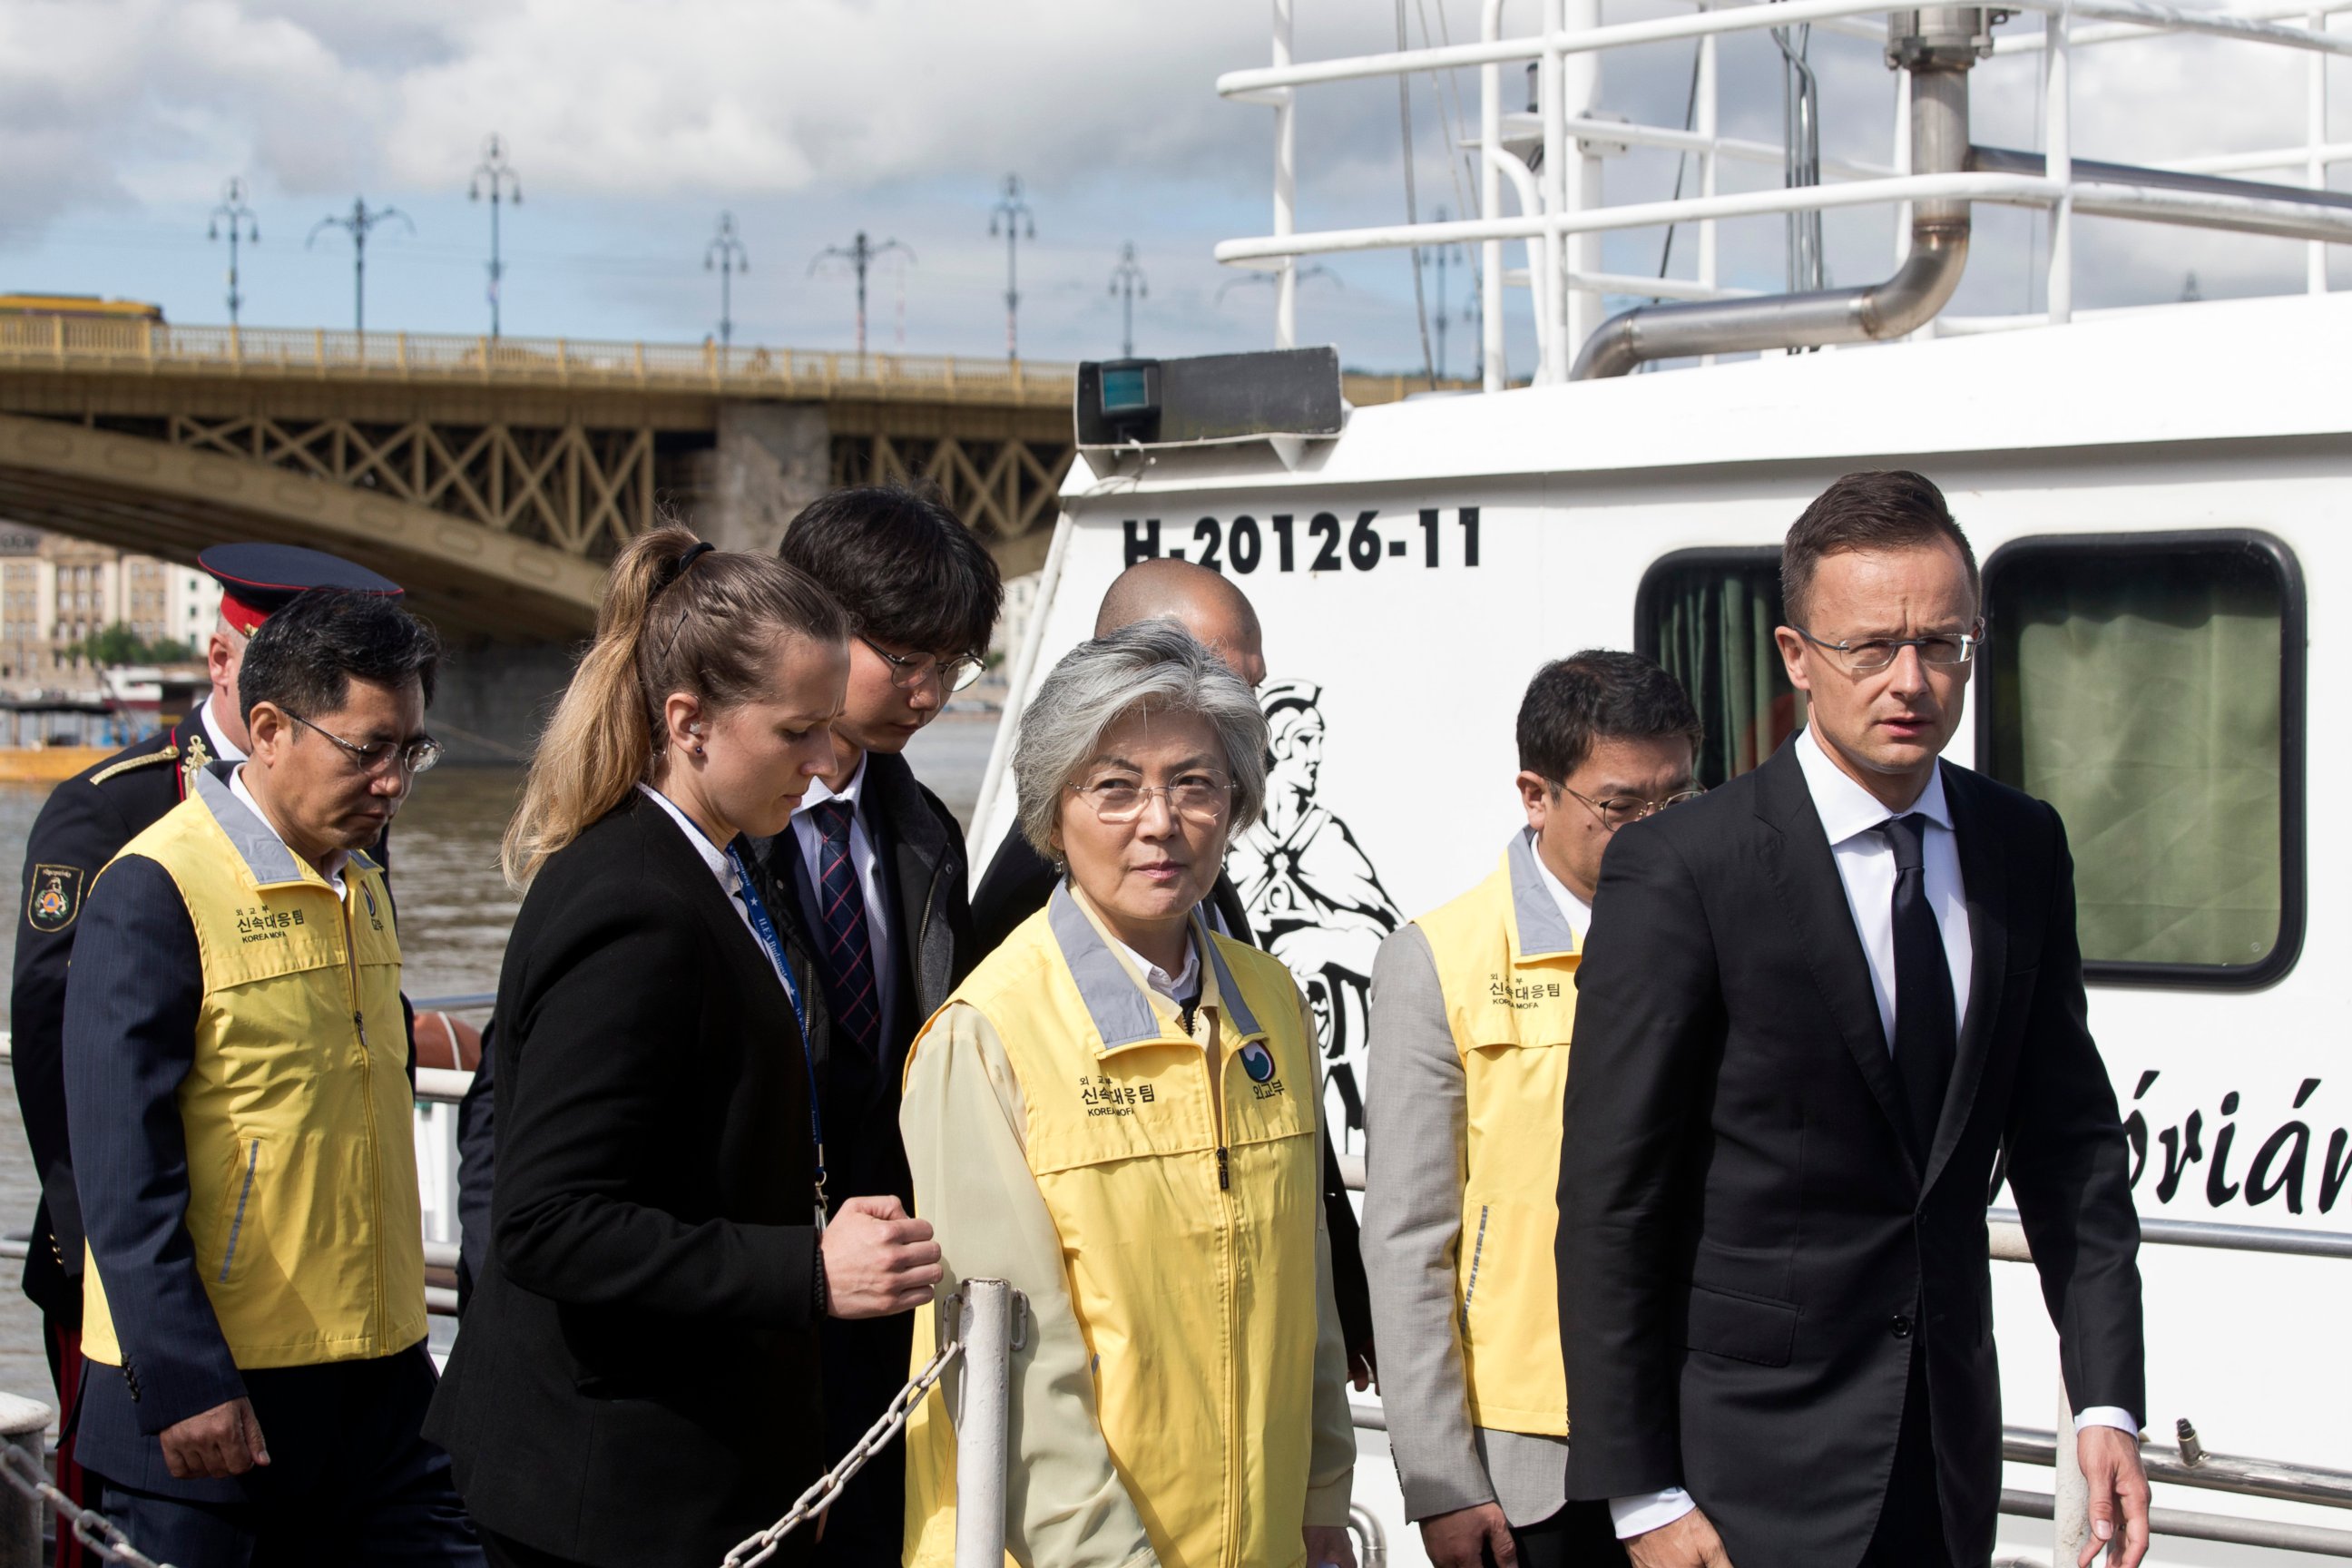 PHOTO: Kang Kyung-wha, center, foreign minister of South Korea, together with her Hungarian counterpart, Peter Szijjarto, right, visits the bank of the Danube River close to Margit Bridge.